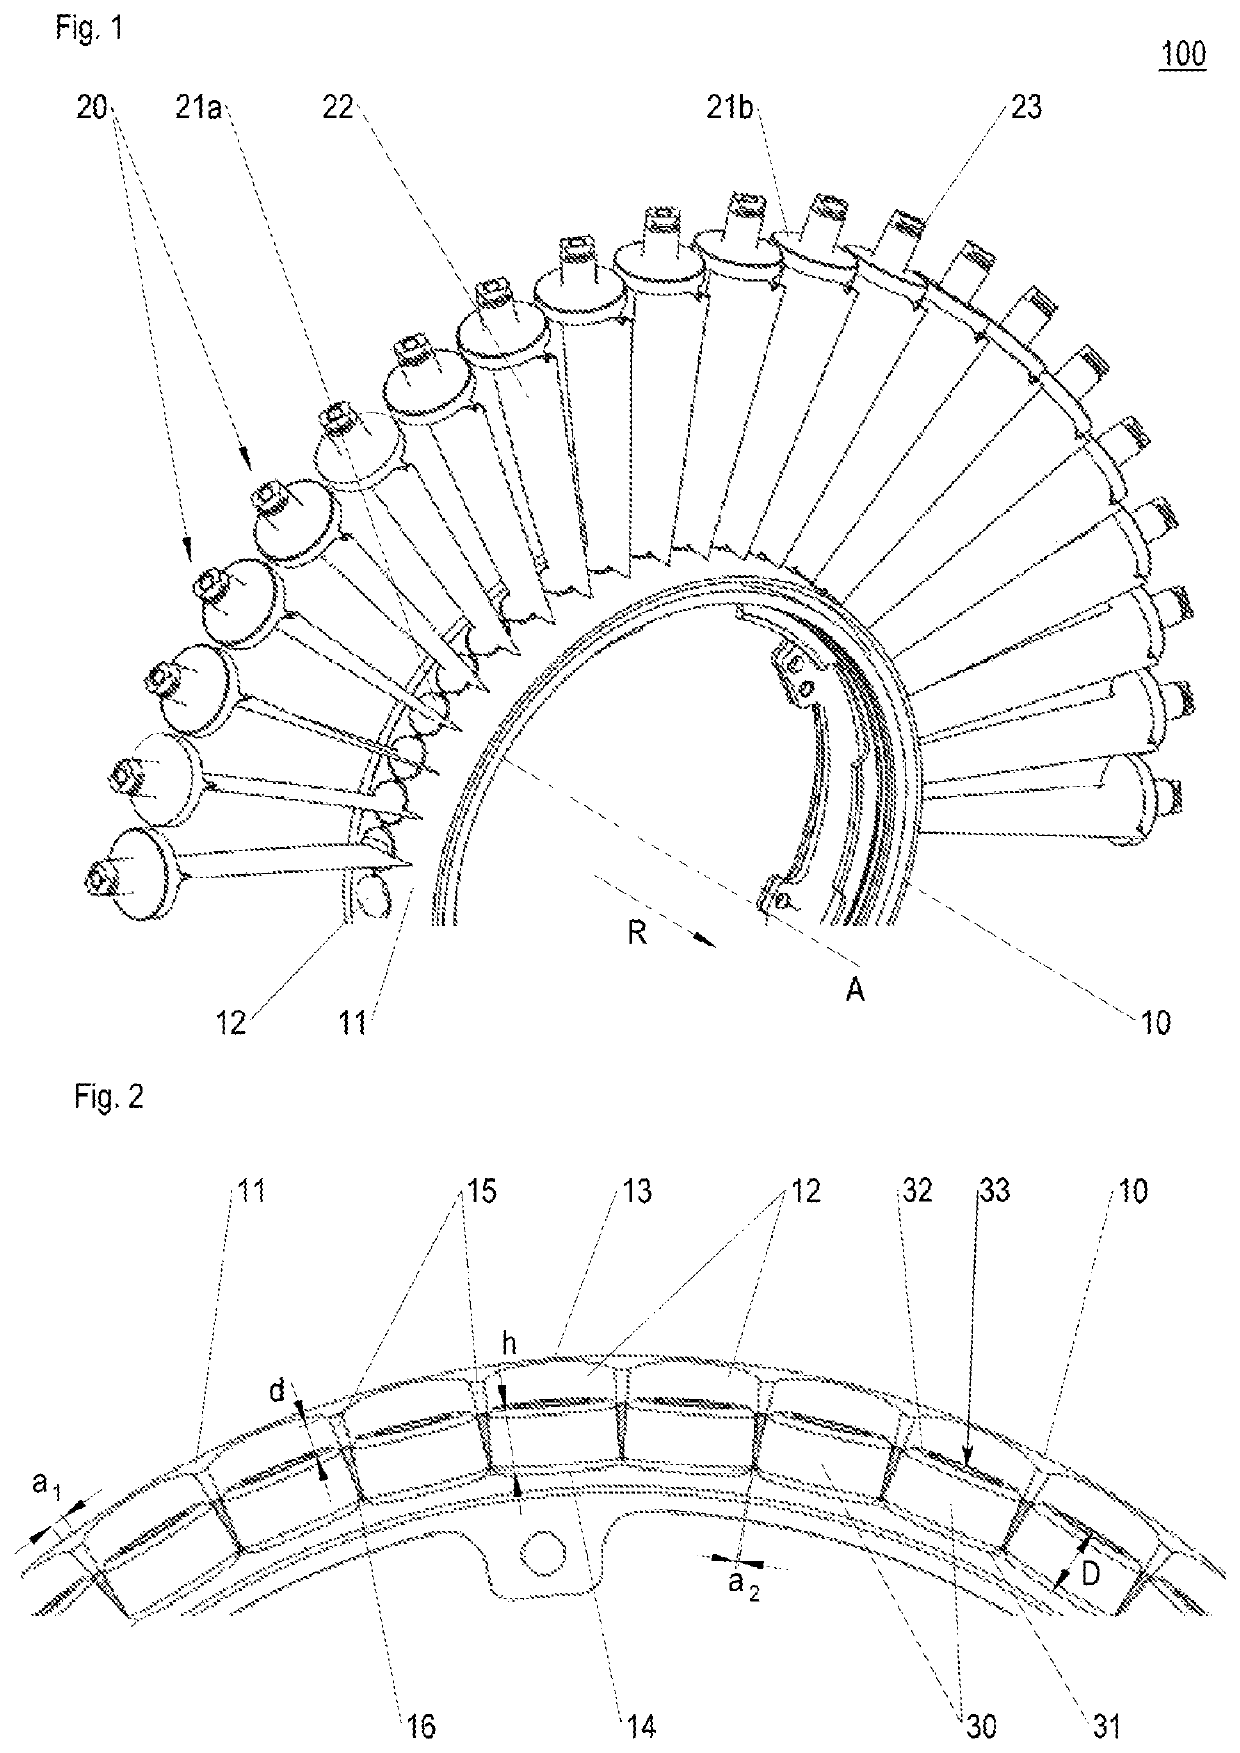 Inner ring and guide vane cascade for a turbomachine